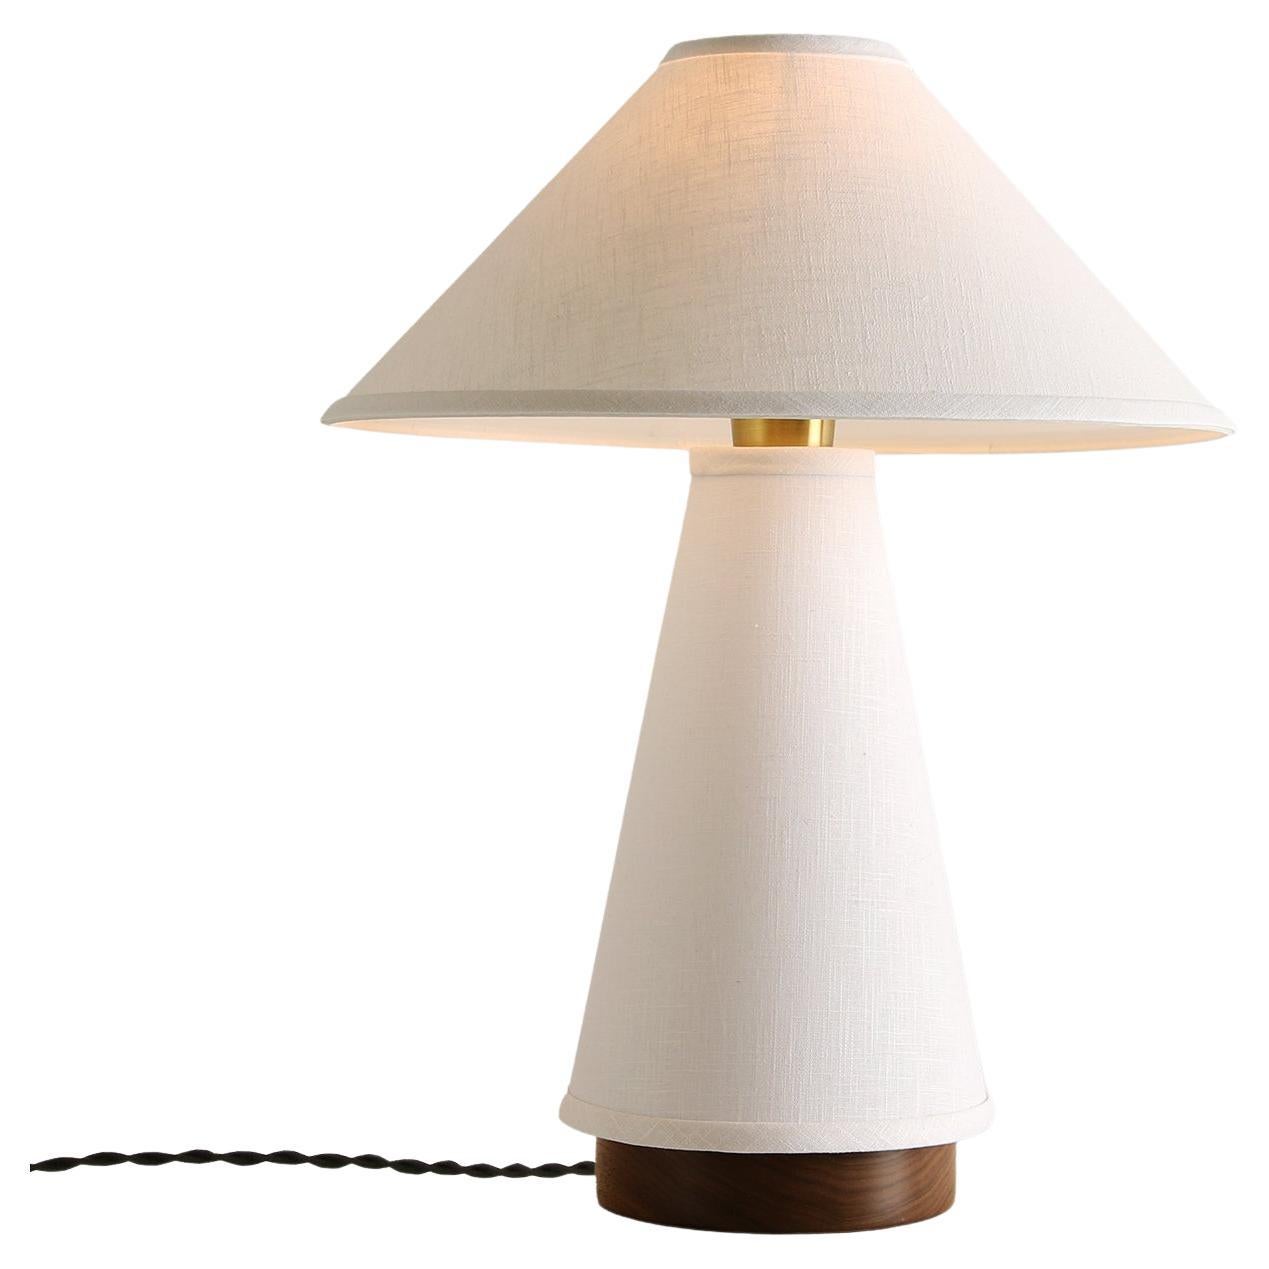 Linden Table Lamp, by Studio DUNN